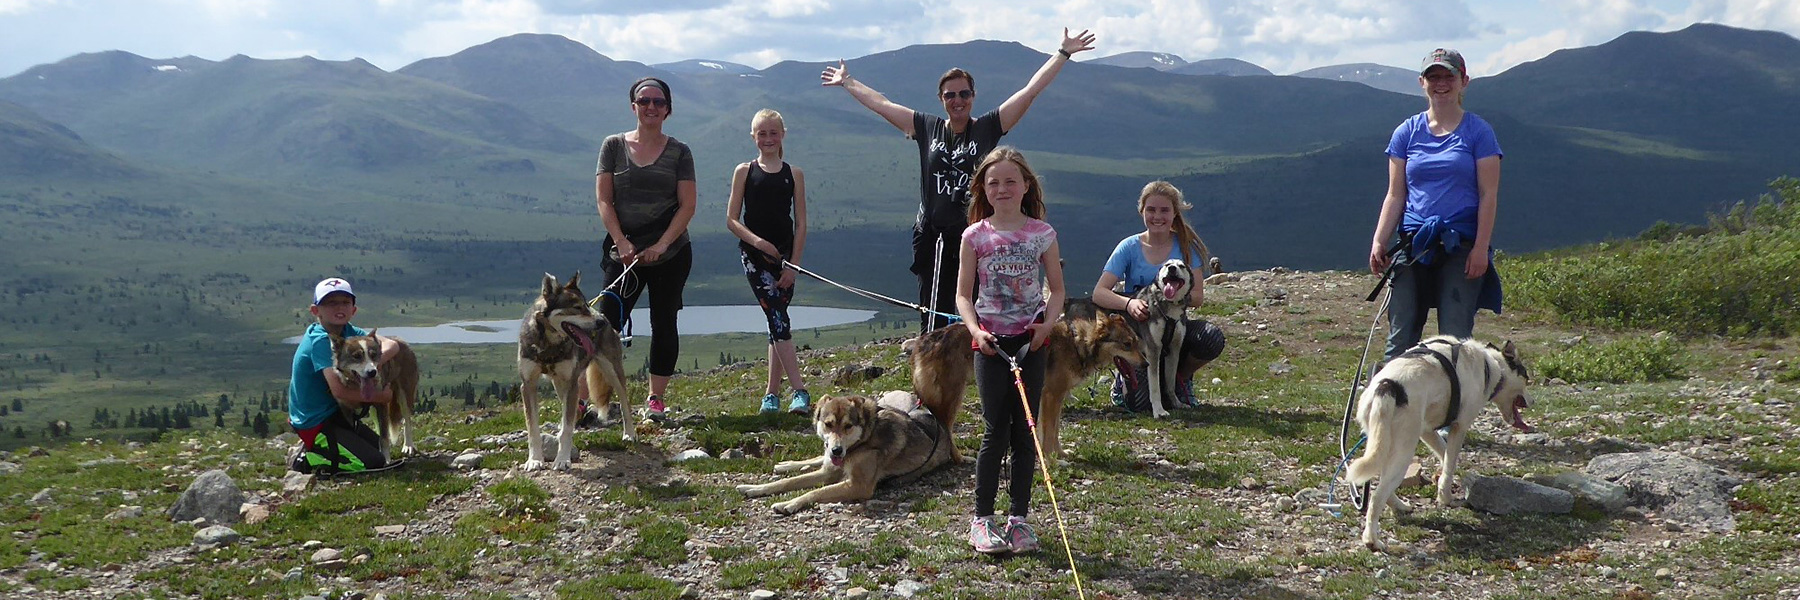 Into the Wild Adventures, dog sledding tours and winter adventures in the Yukon Territory, Canada - Dogsledding Tours